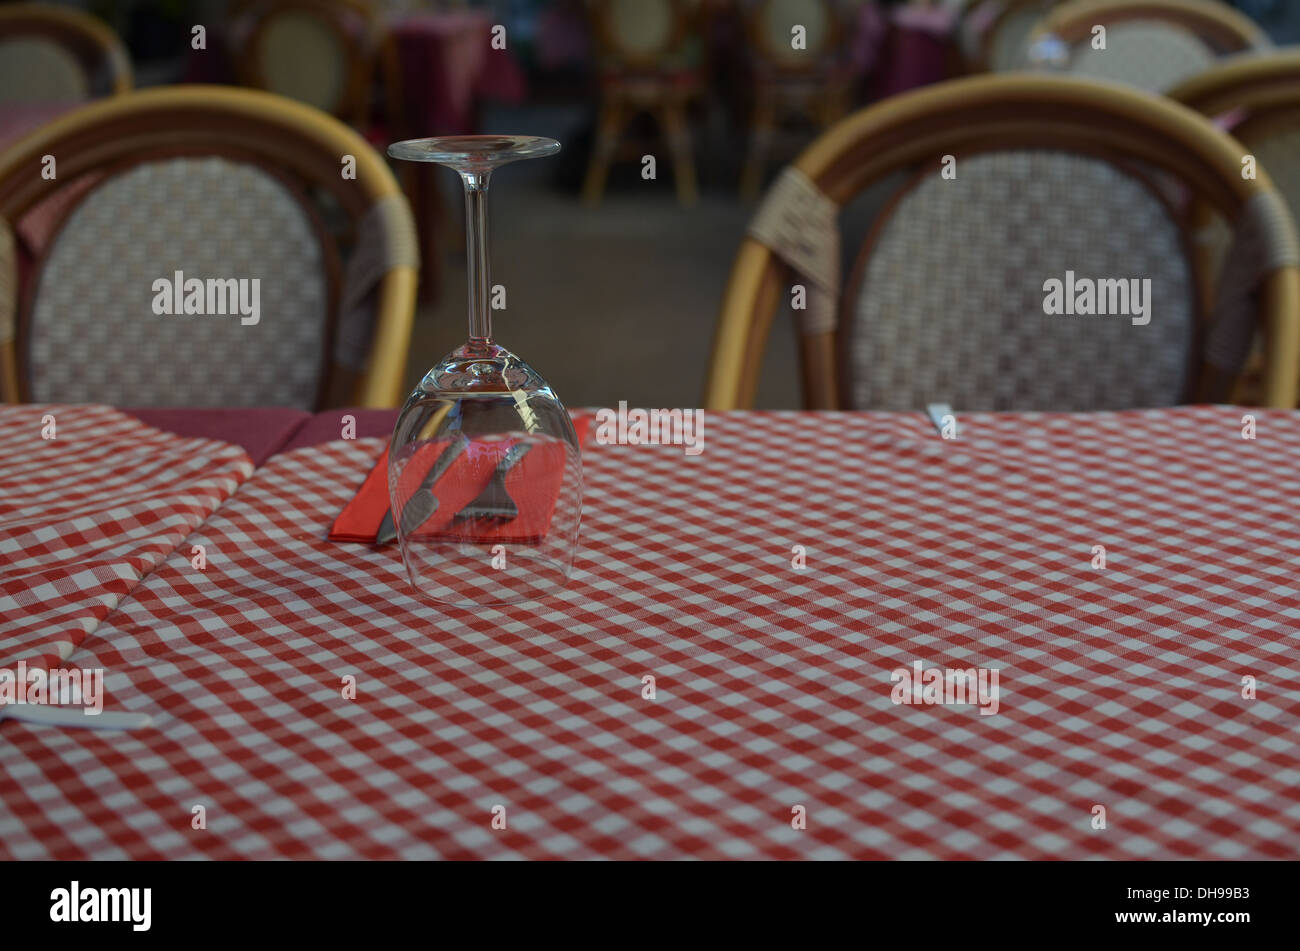 Table at a restaurant with red and white check table cloth Stock Photo